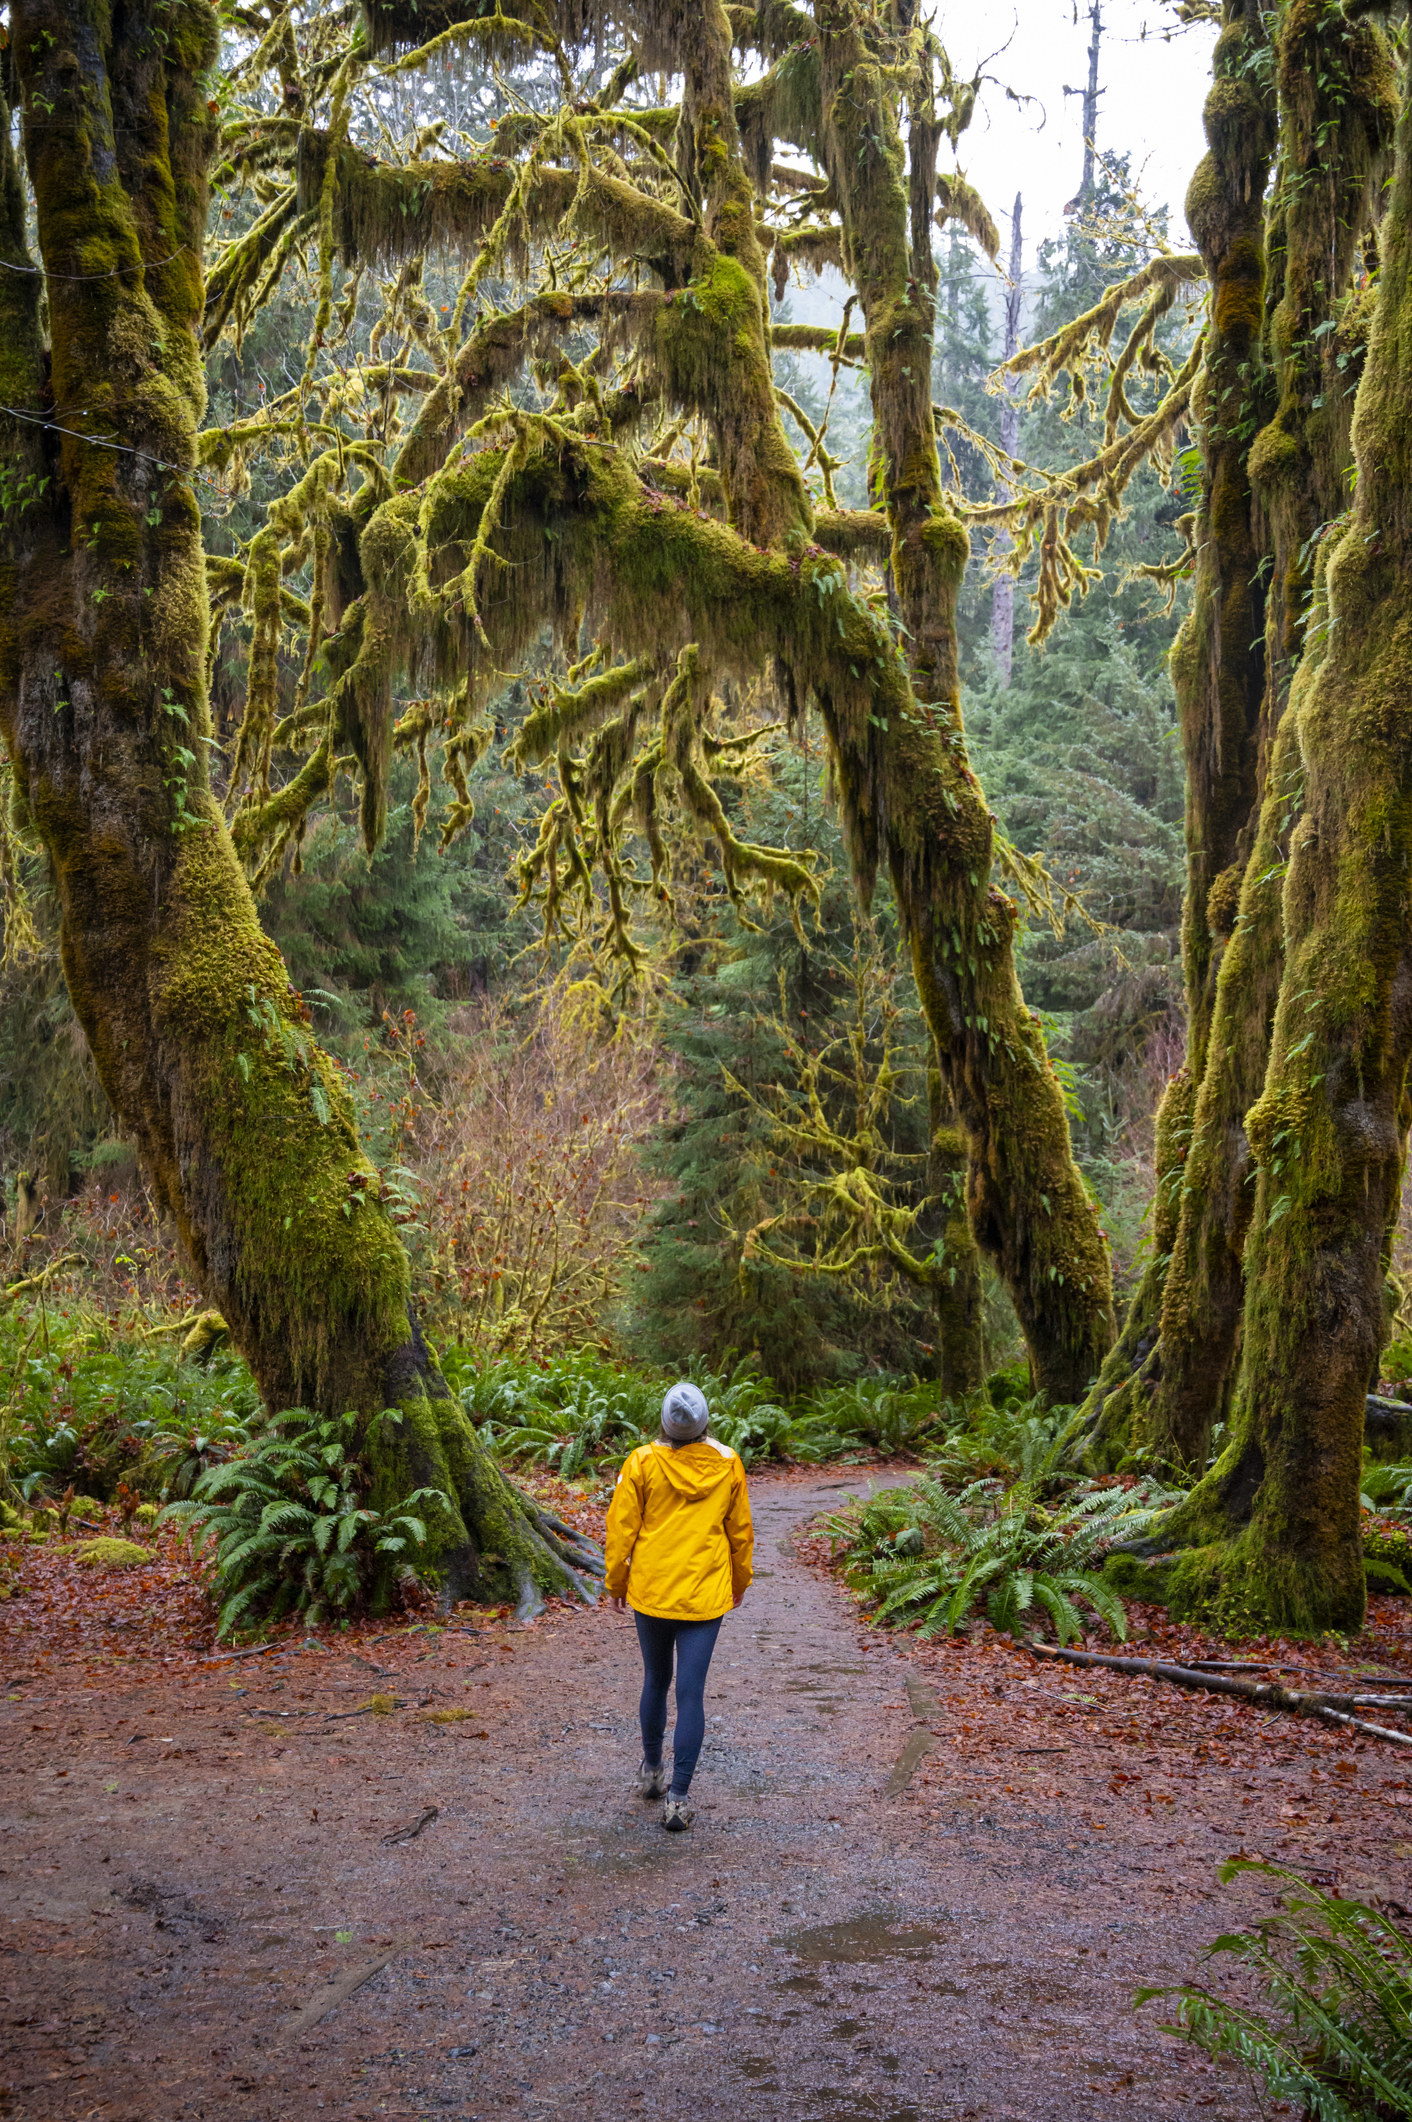 A person in yellow rain jacket walking in the Hoh Rainforest